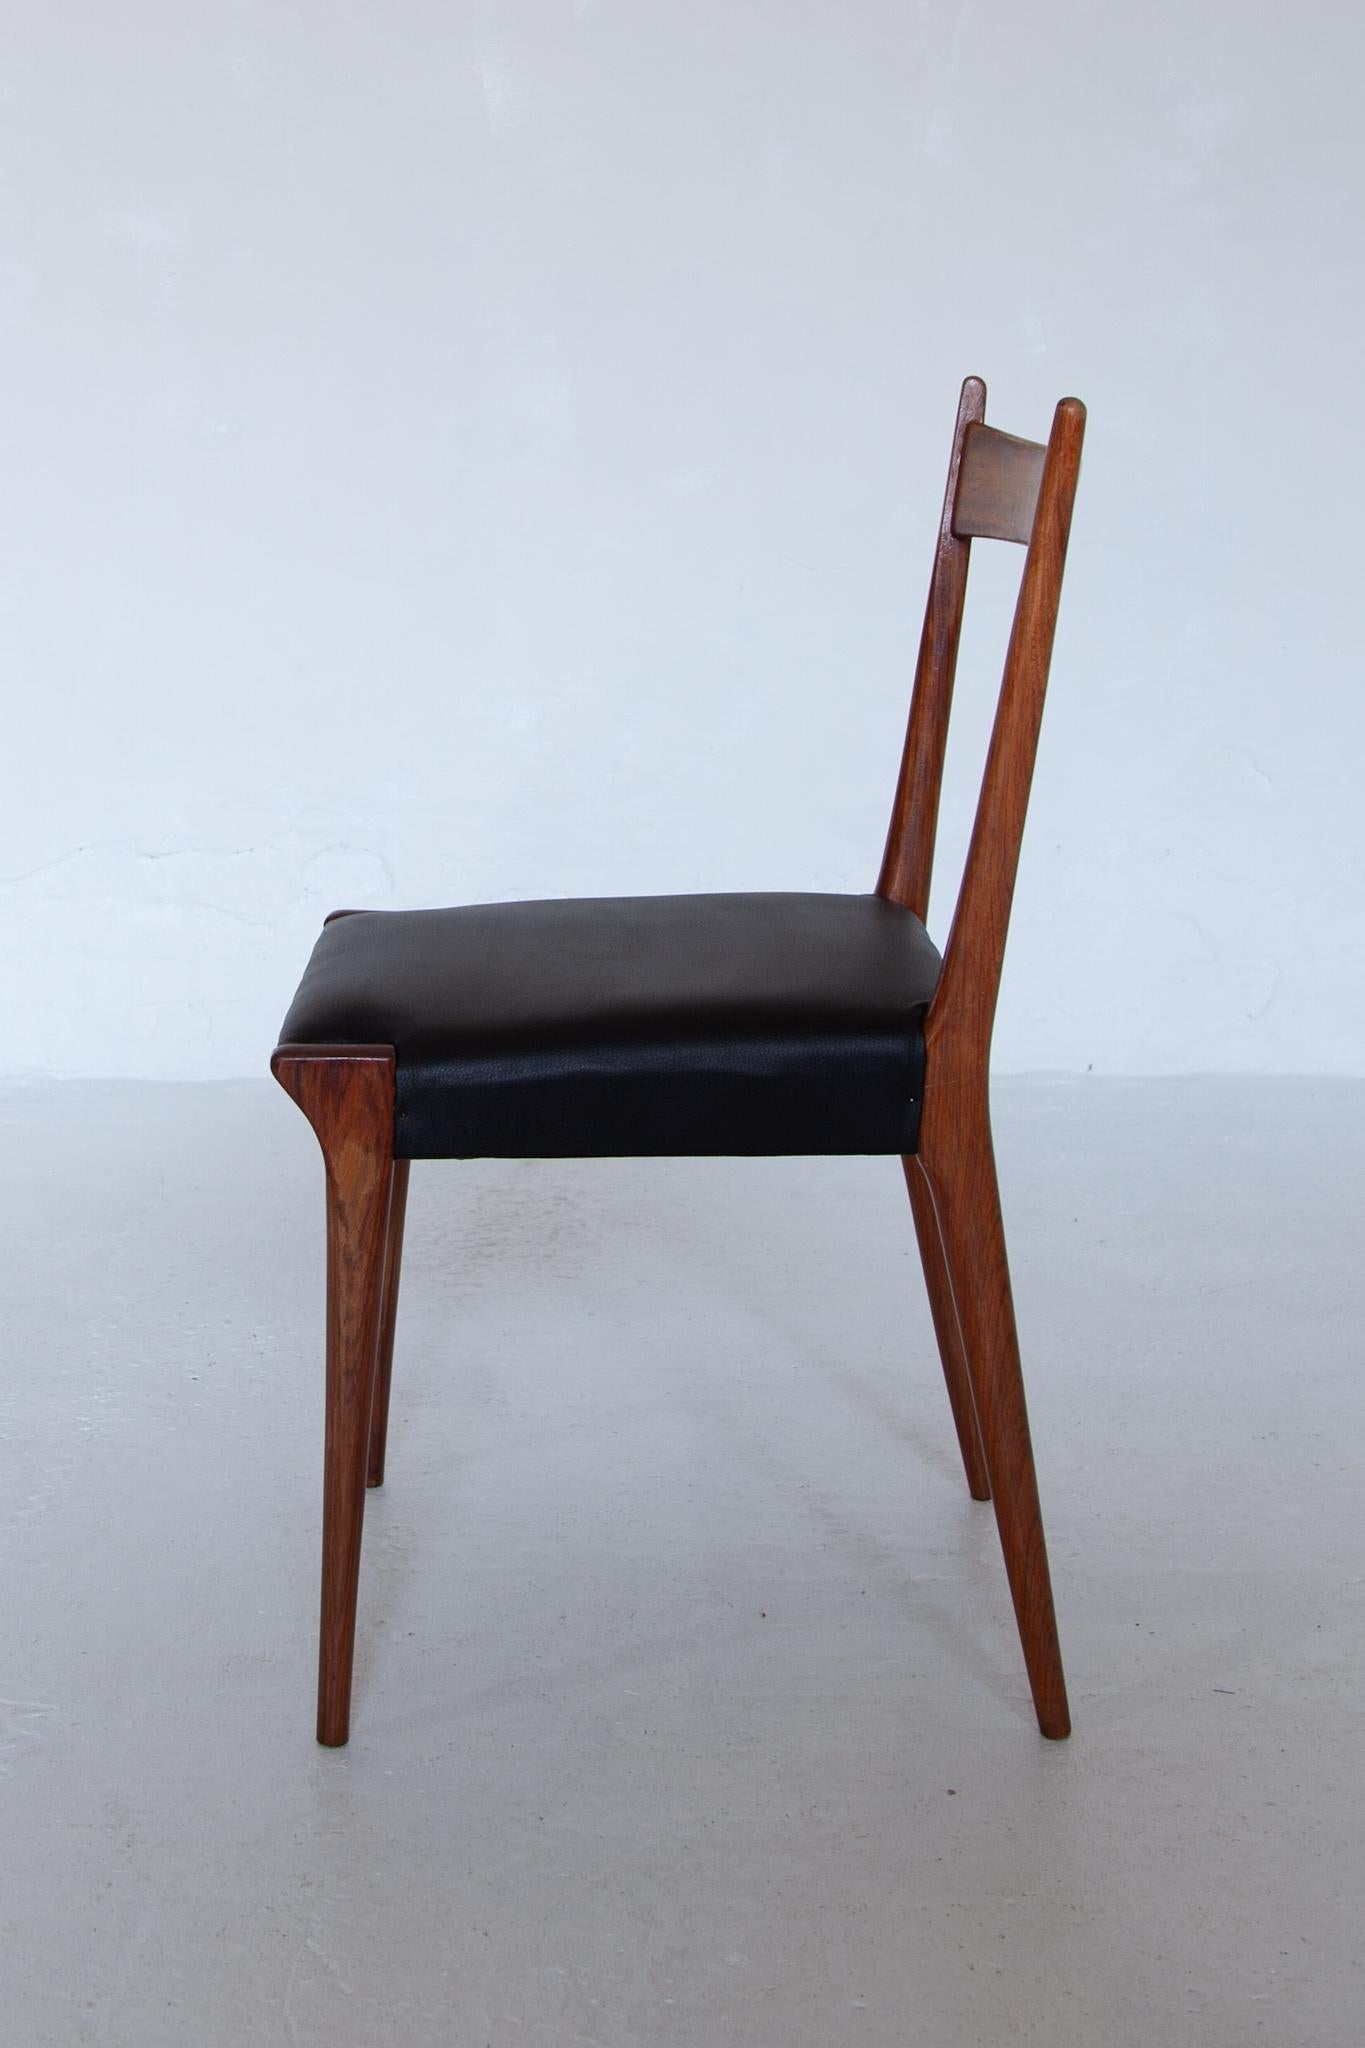 Hand-Crafted Set of Eight Dining Chairs 1958, Belgium for Belform designed by Alfred Hendrickx